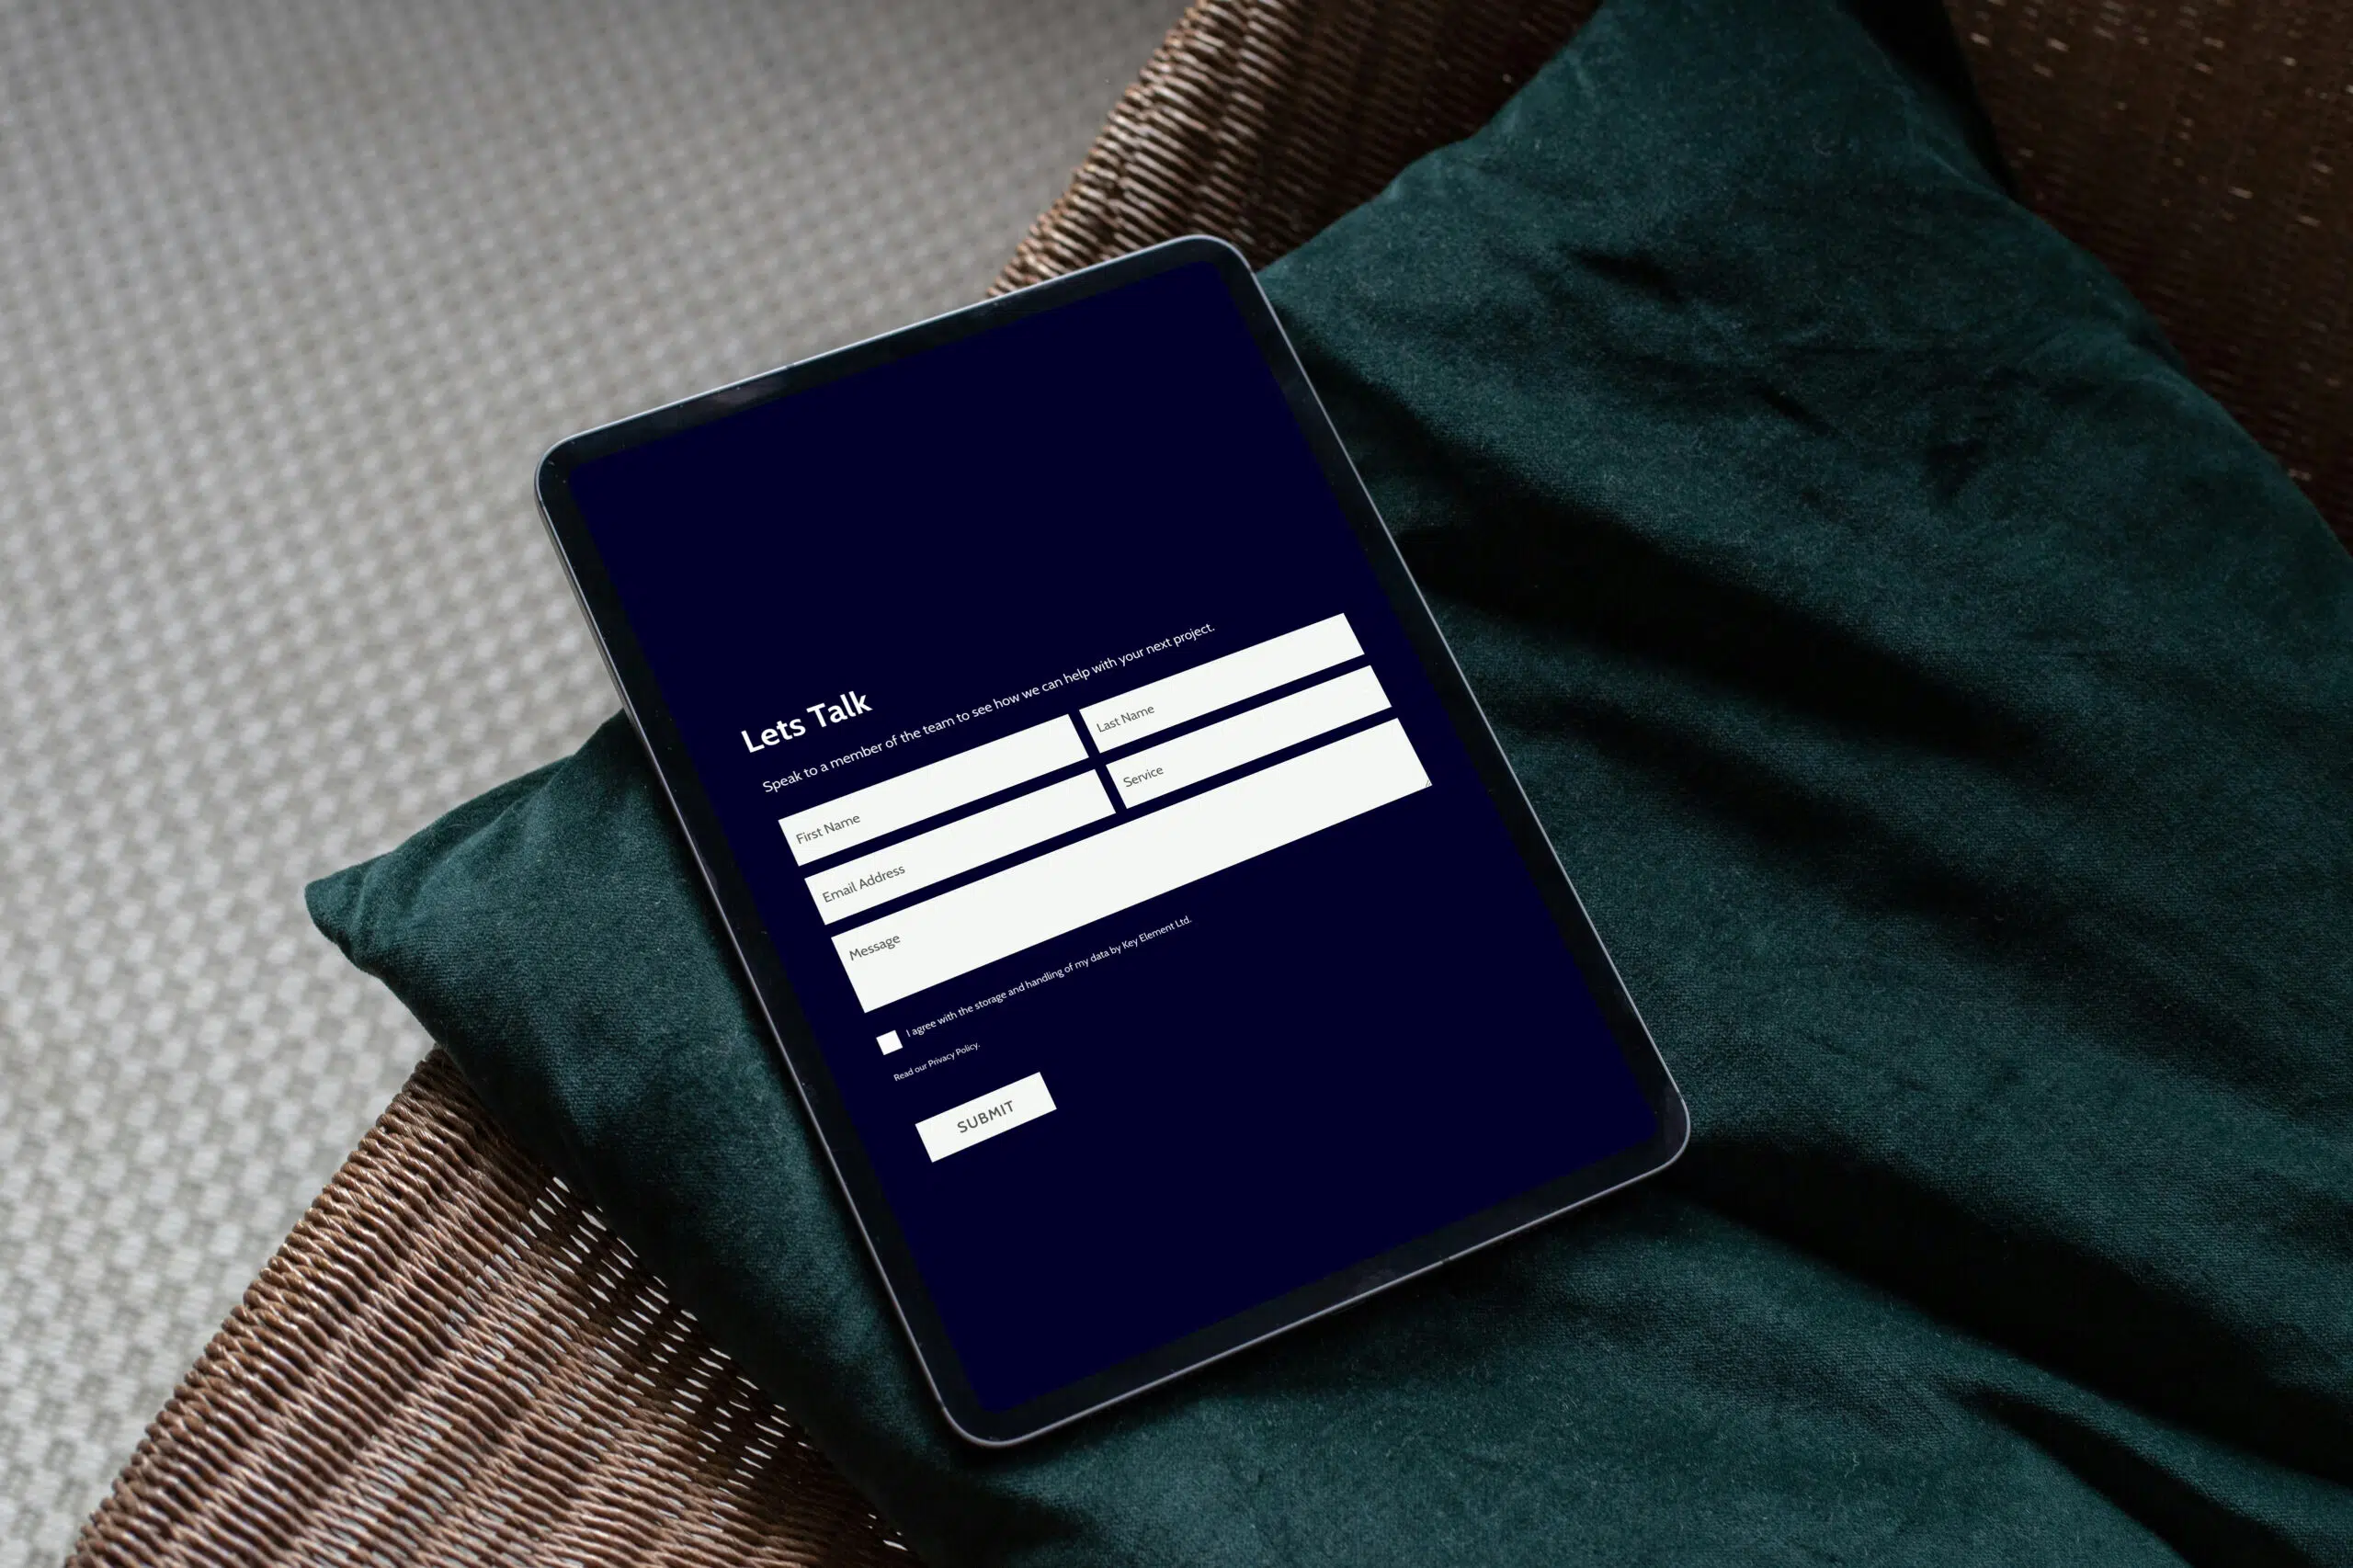 Apple Ipad with contact form